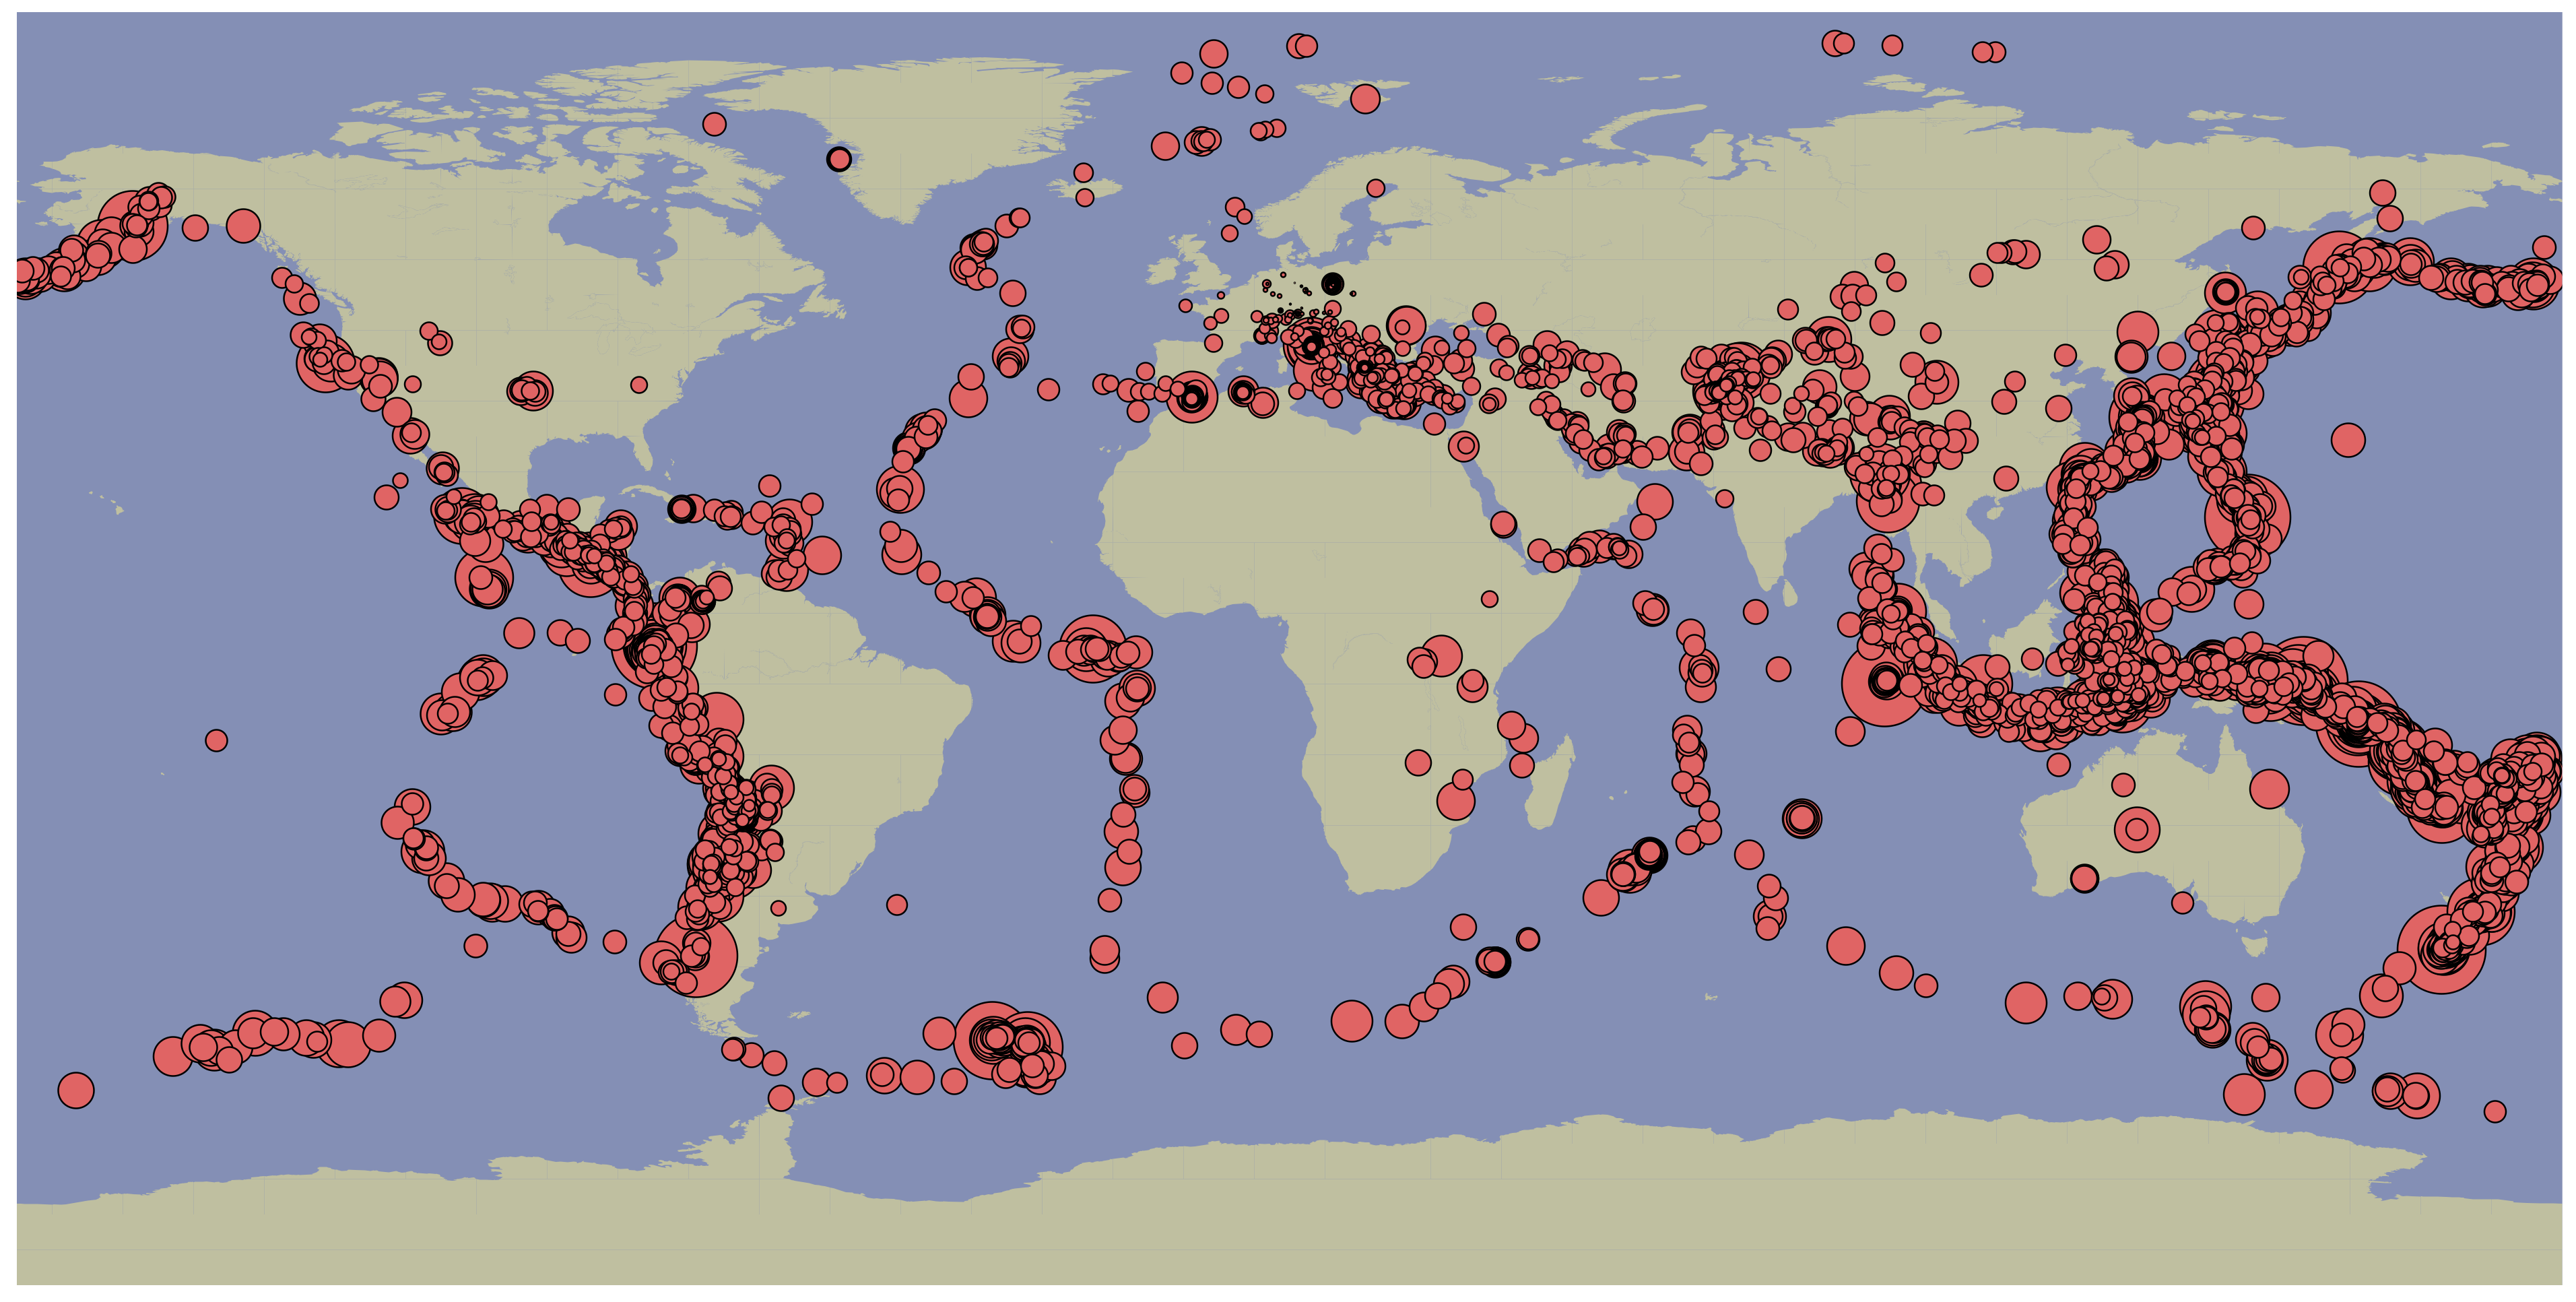 _images/world-seismicity.png